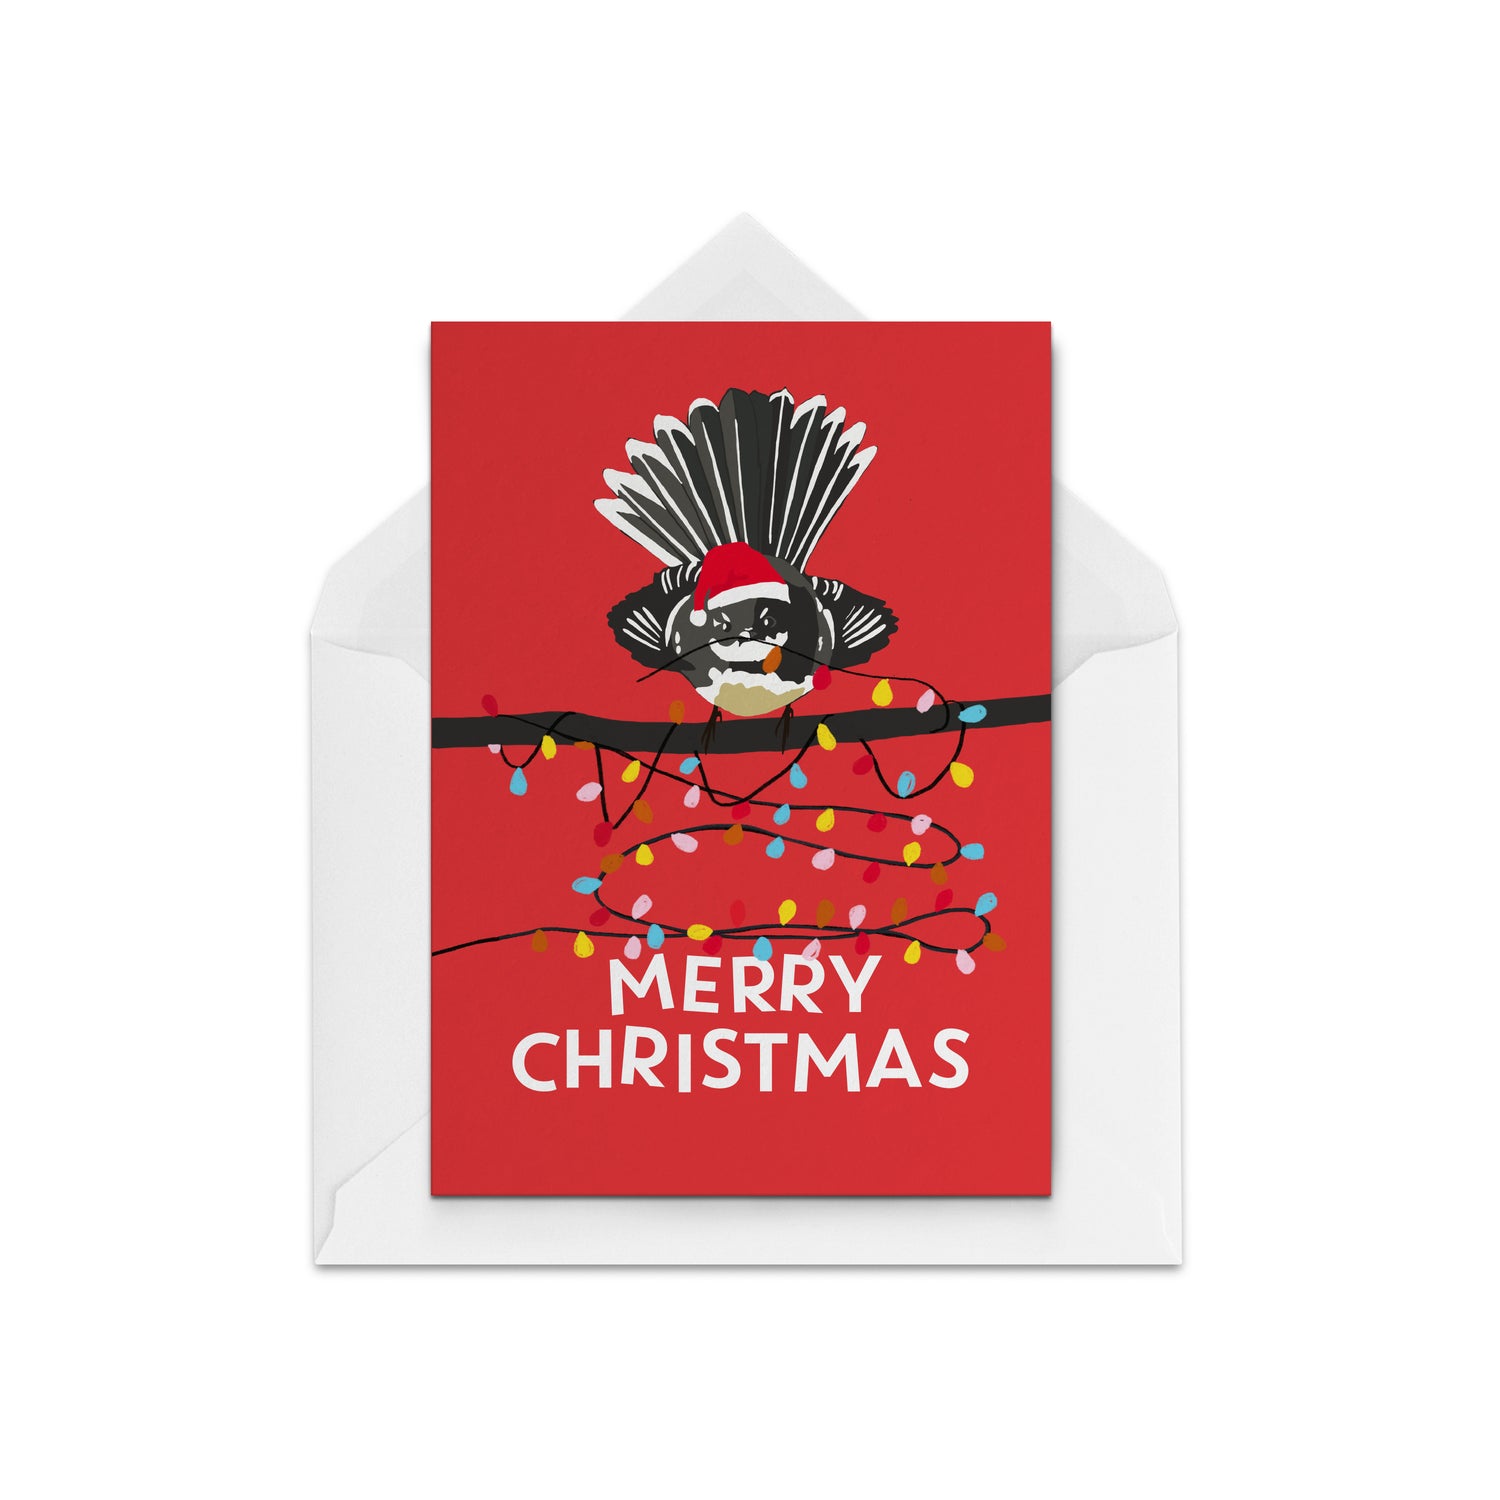 Christmas Card with a picture of a Fantail by The Paper People Greeting Cards: https://www.thepaperpeople.co.nz/collections/christmas-cards-blank-inside